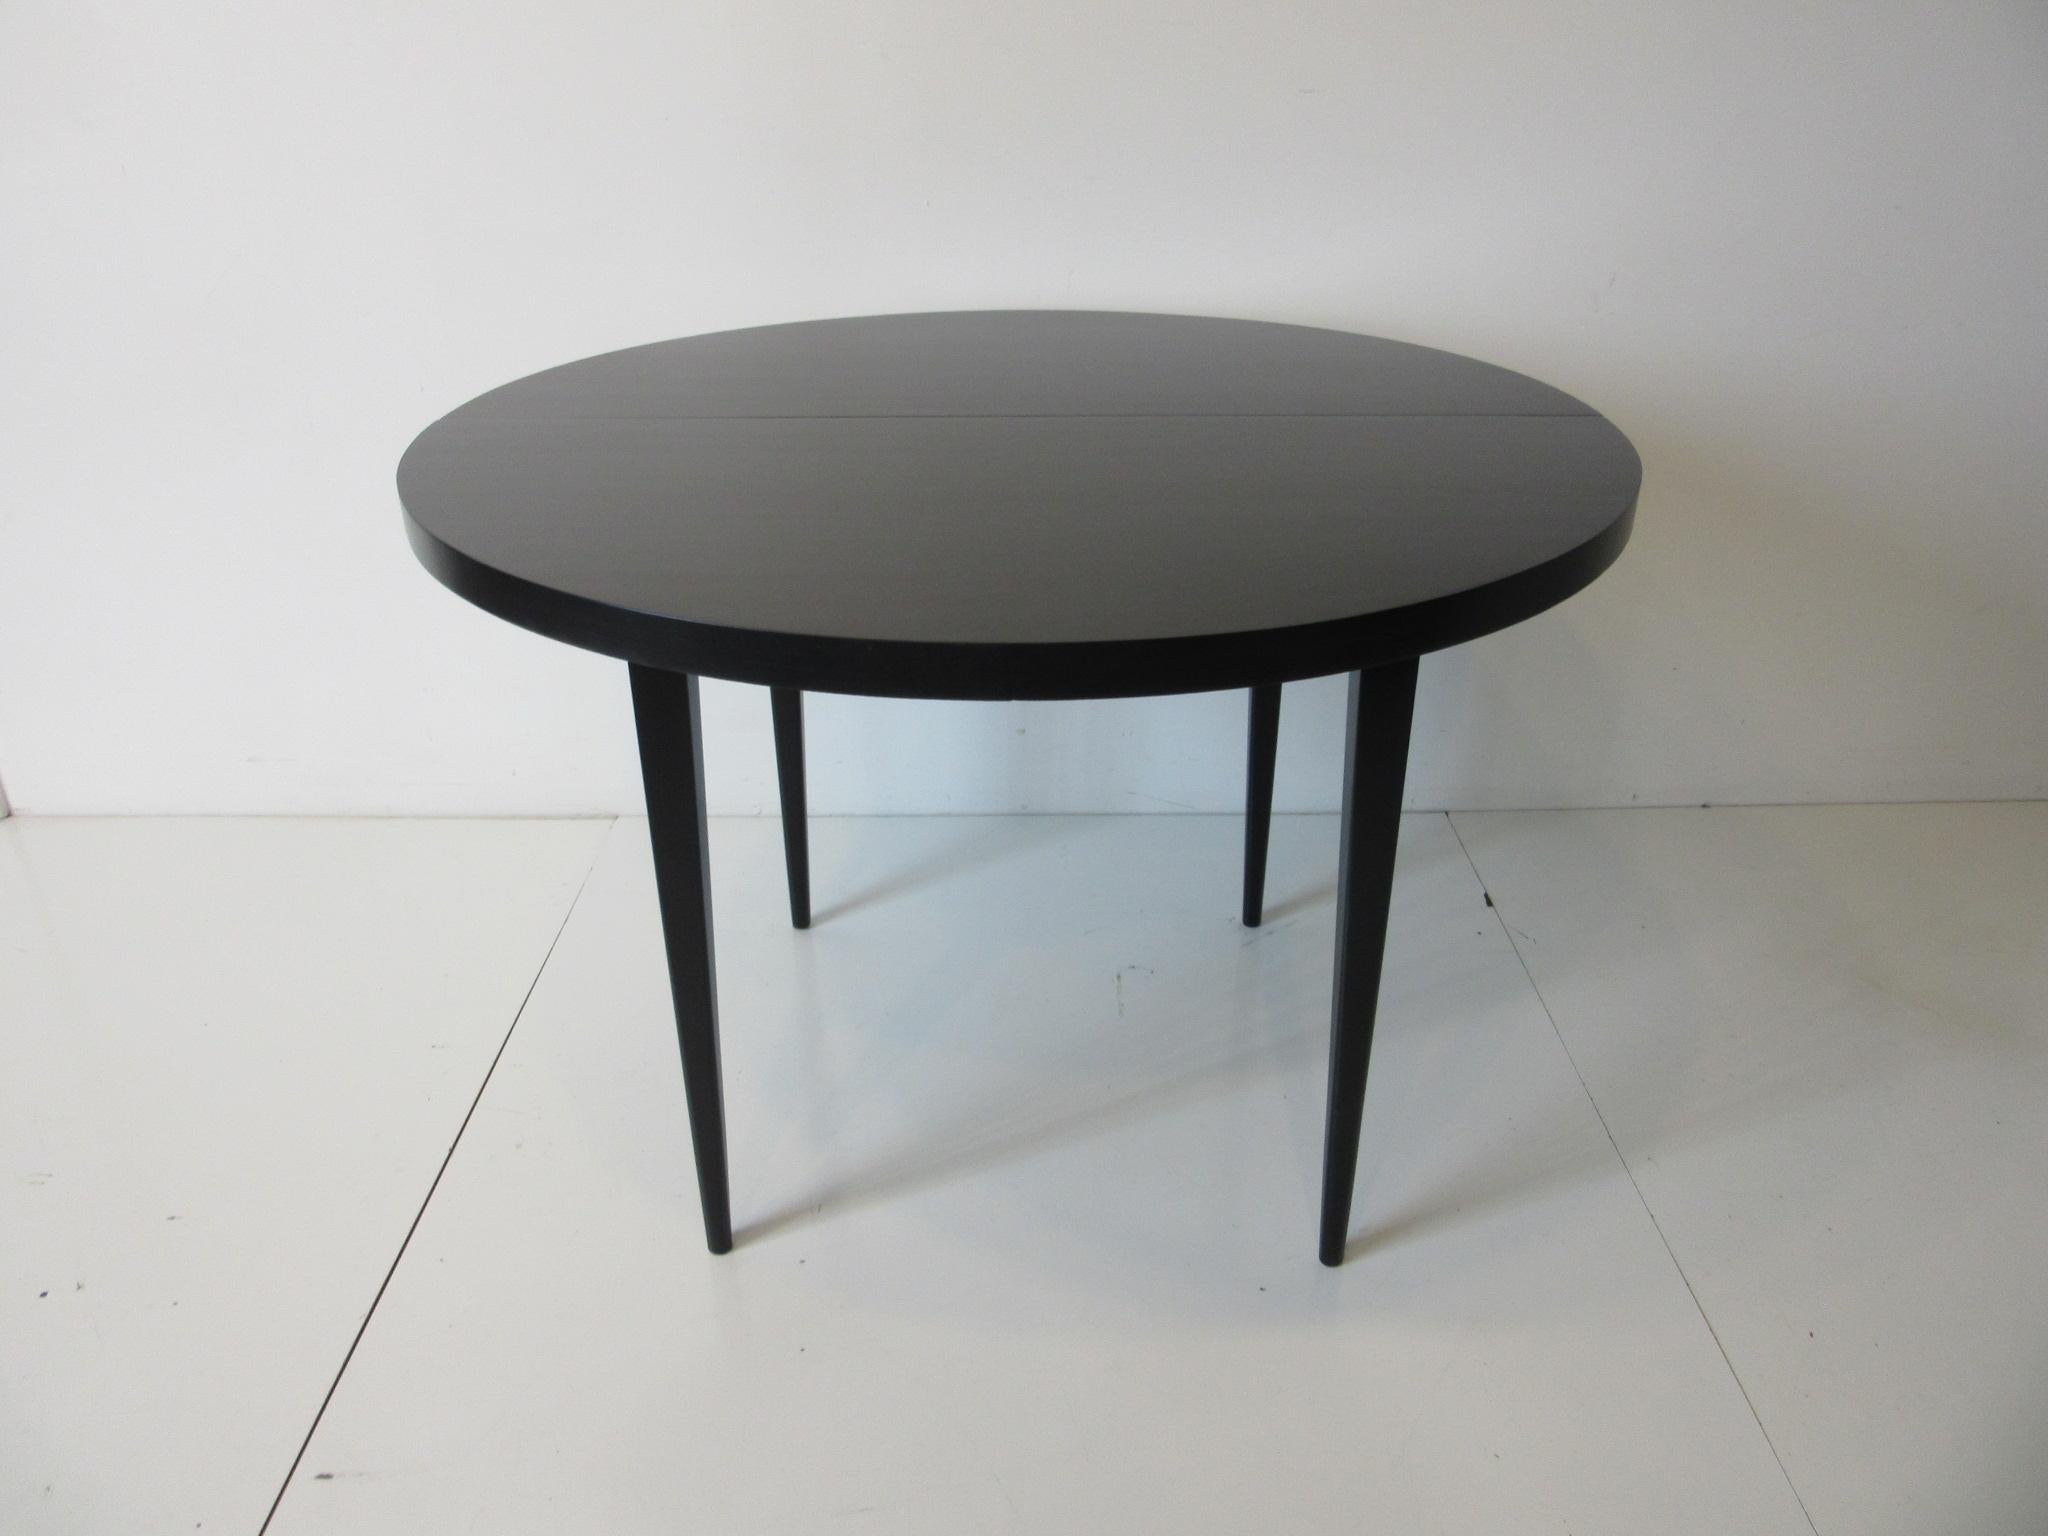 A solid maple wood midcentury dining table in satin black with two 15